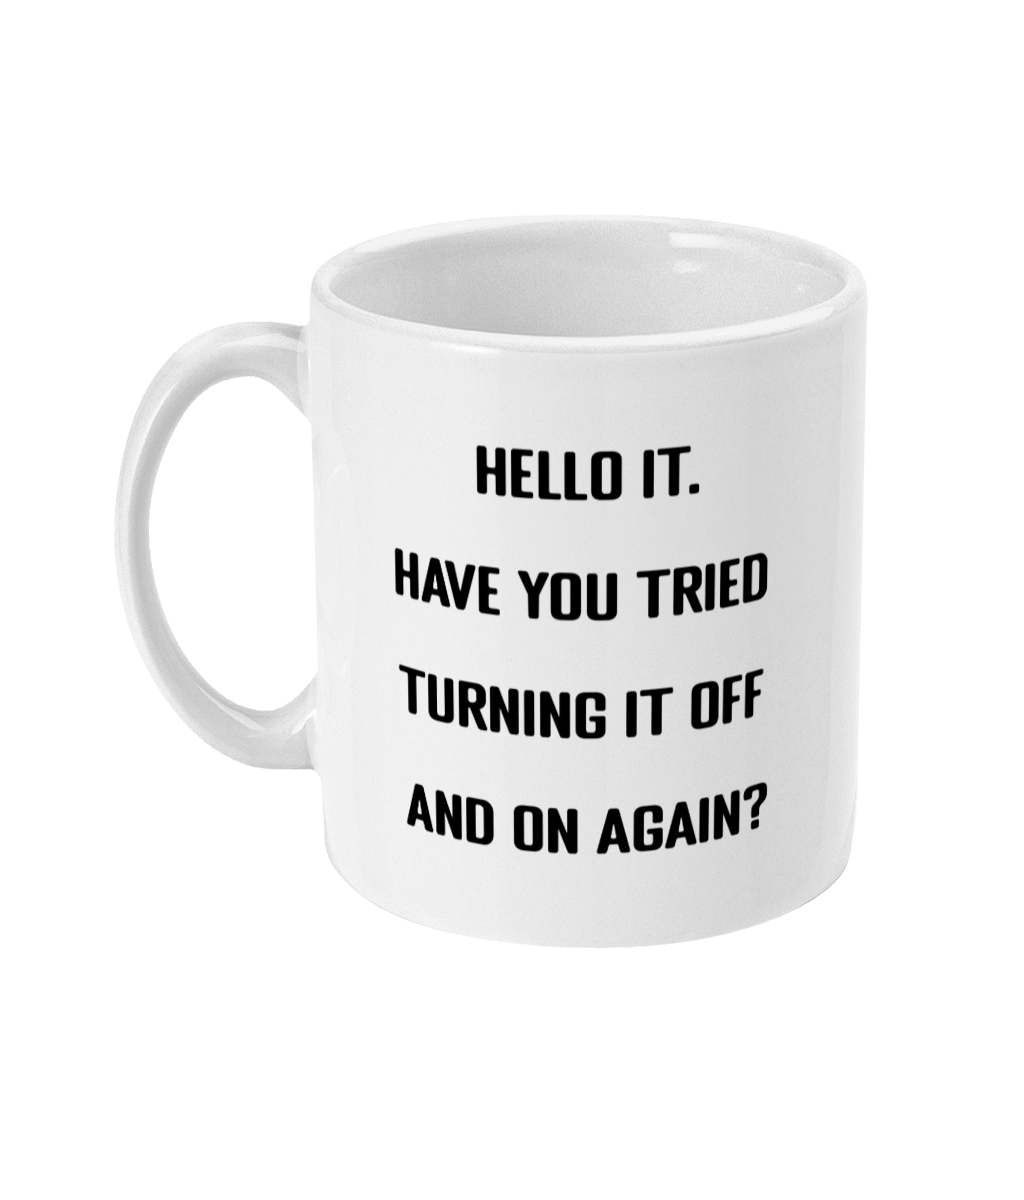 A glossy white 11oz mug with the words 'Hello IT. Have you tried turning it off and on again?' printed in the centre of the mug in simple black block font. The mug is placed in front of a white background. 